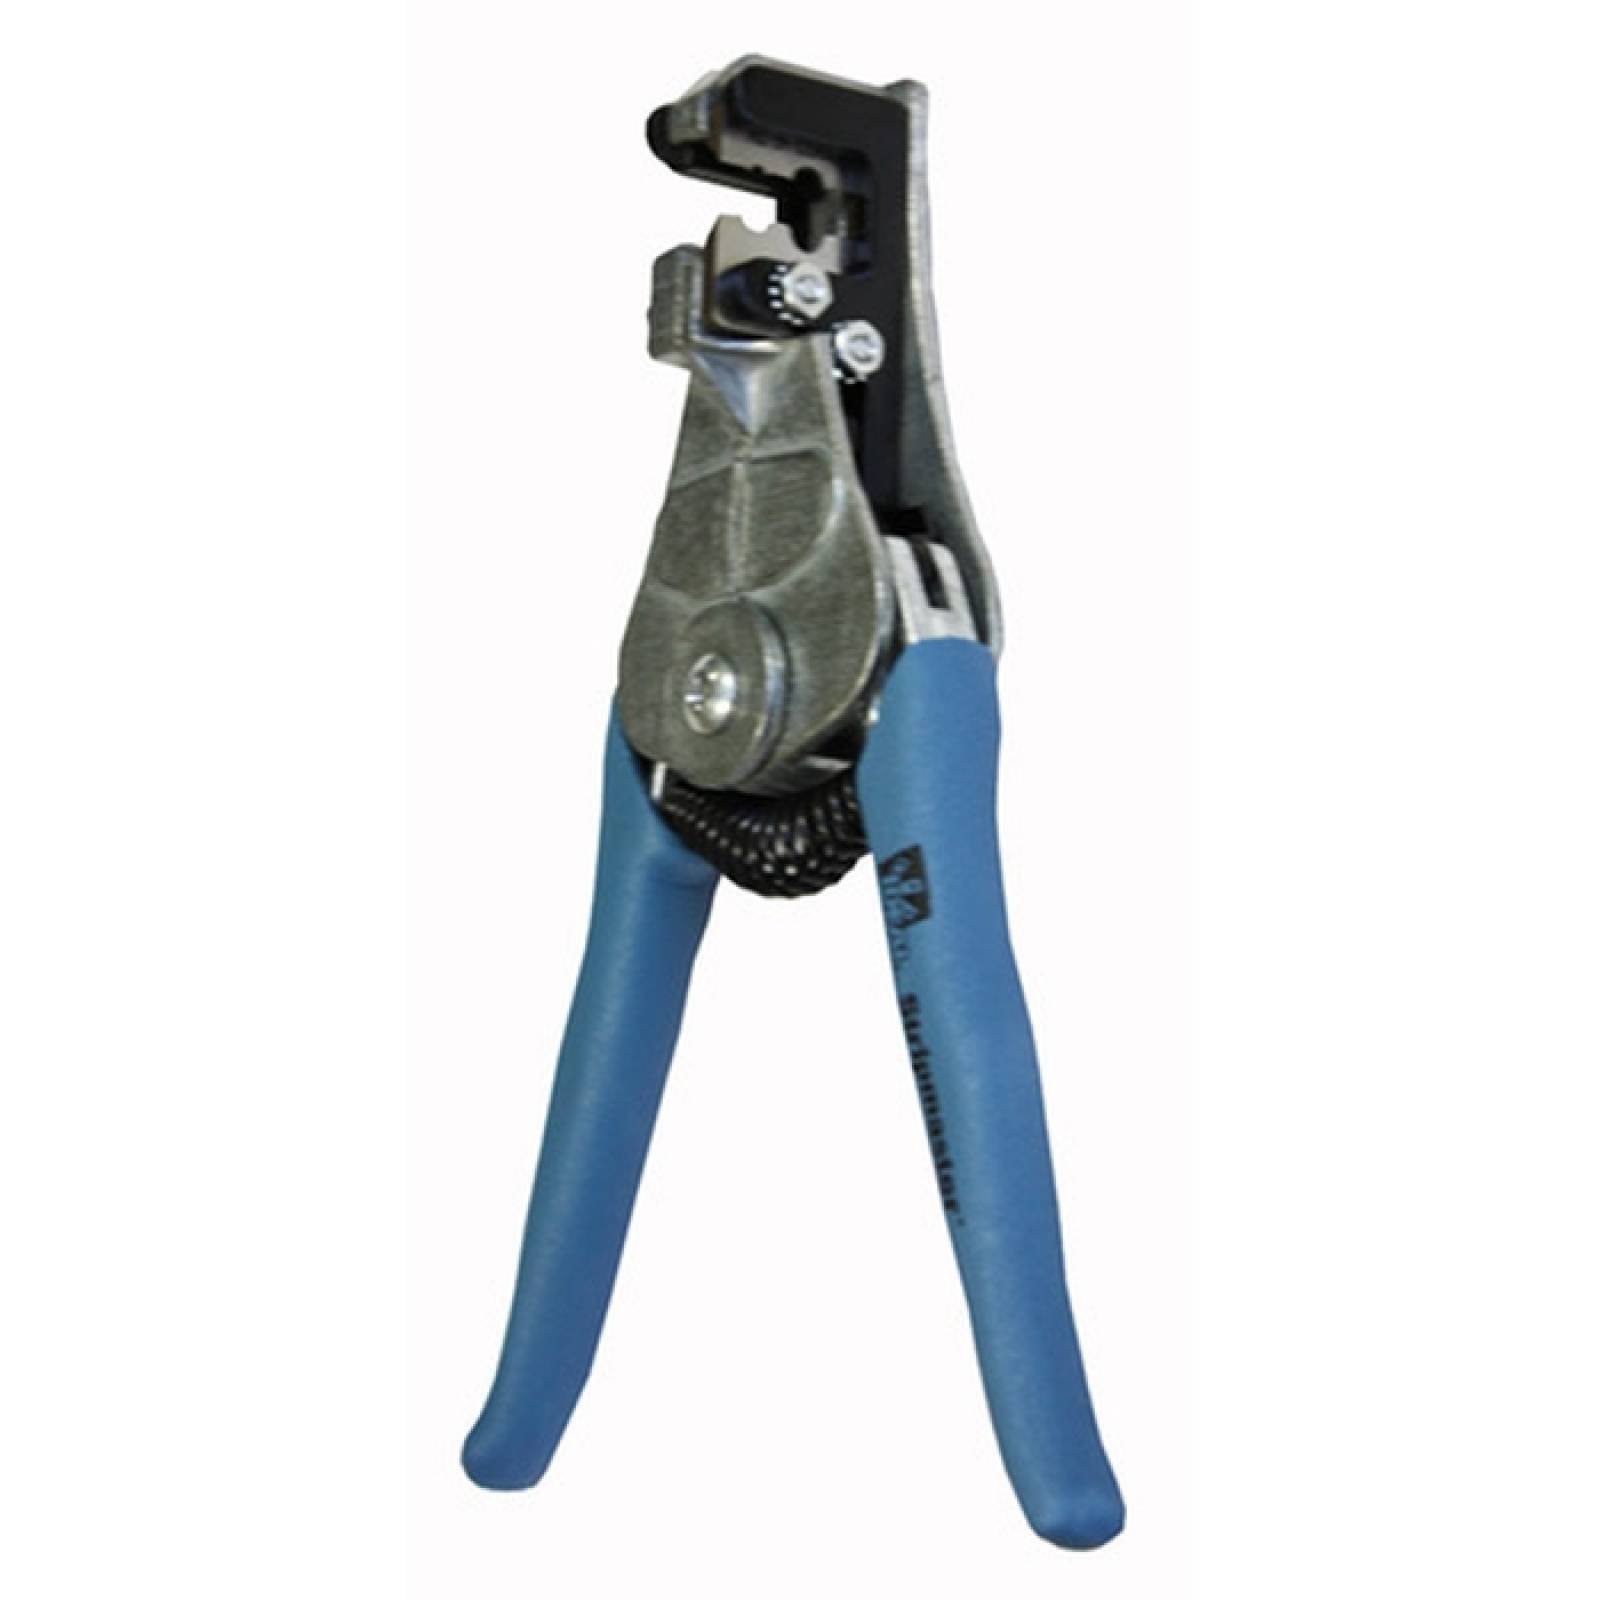 IDEAL Stripmaster Coax Wire Striping Tool